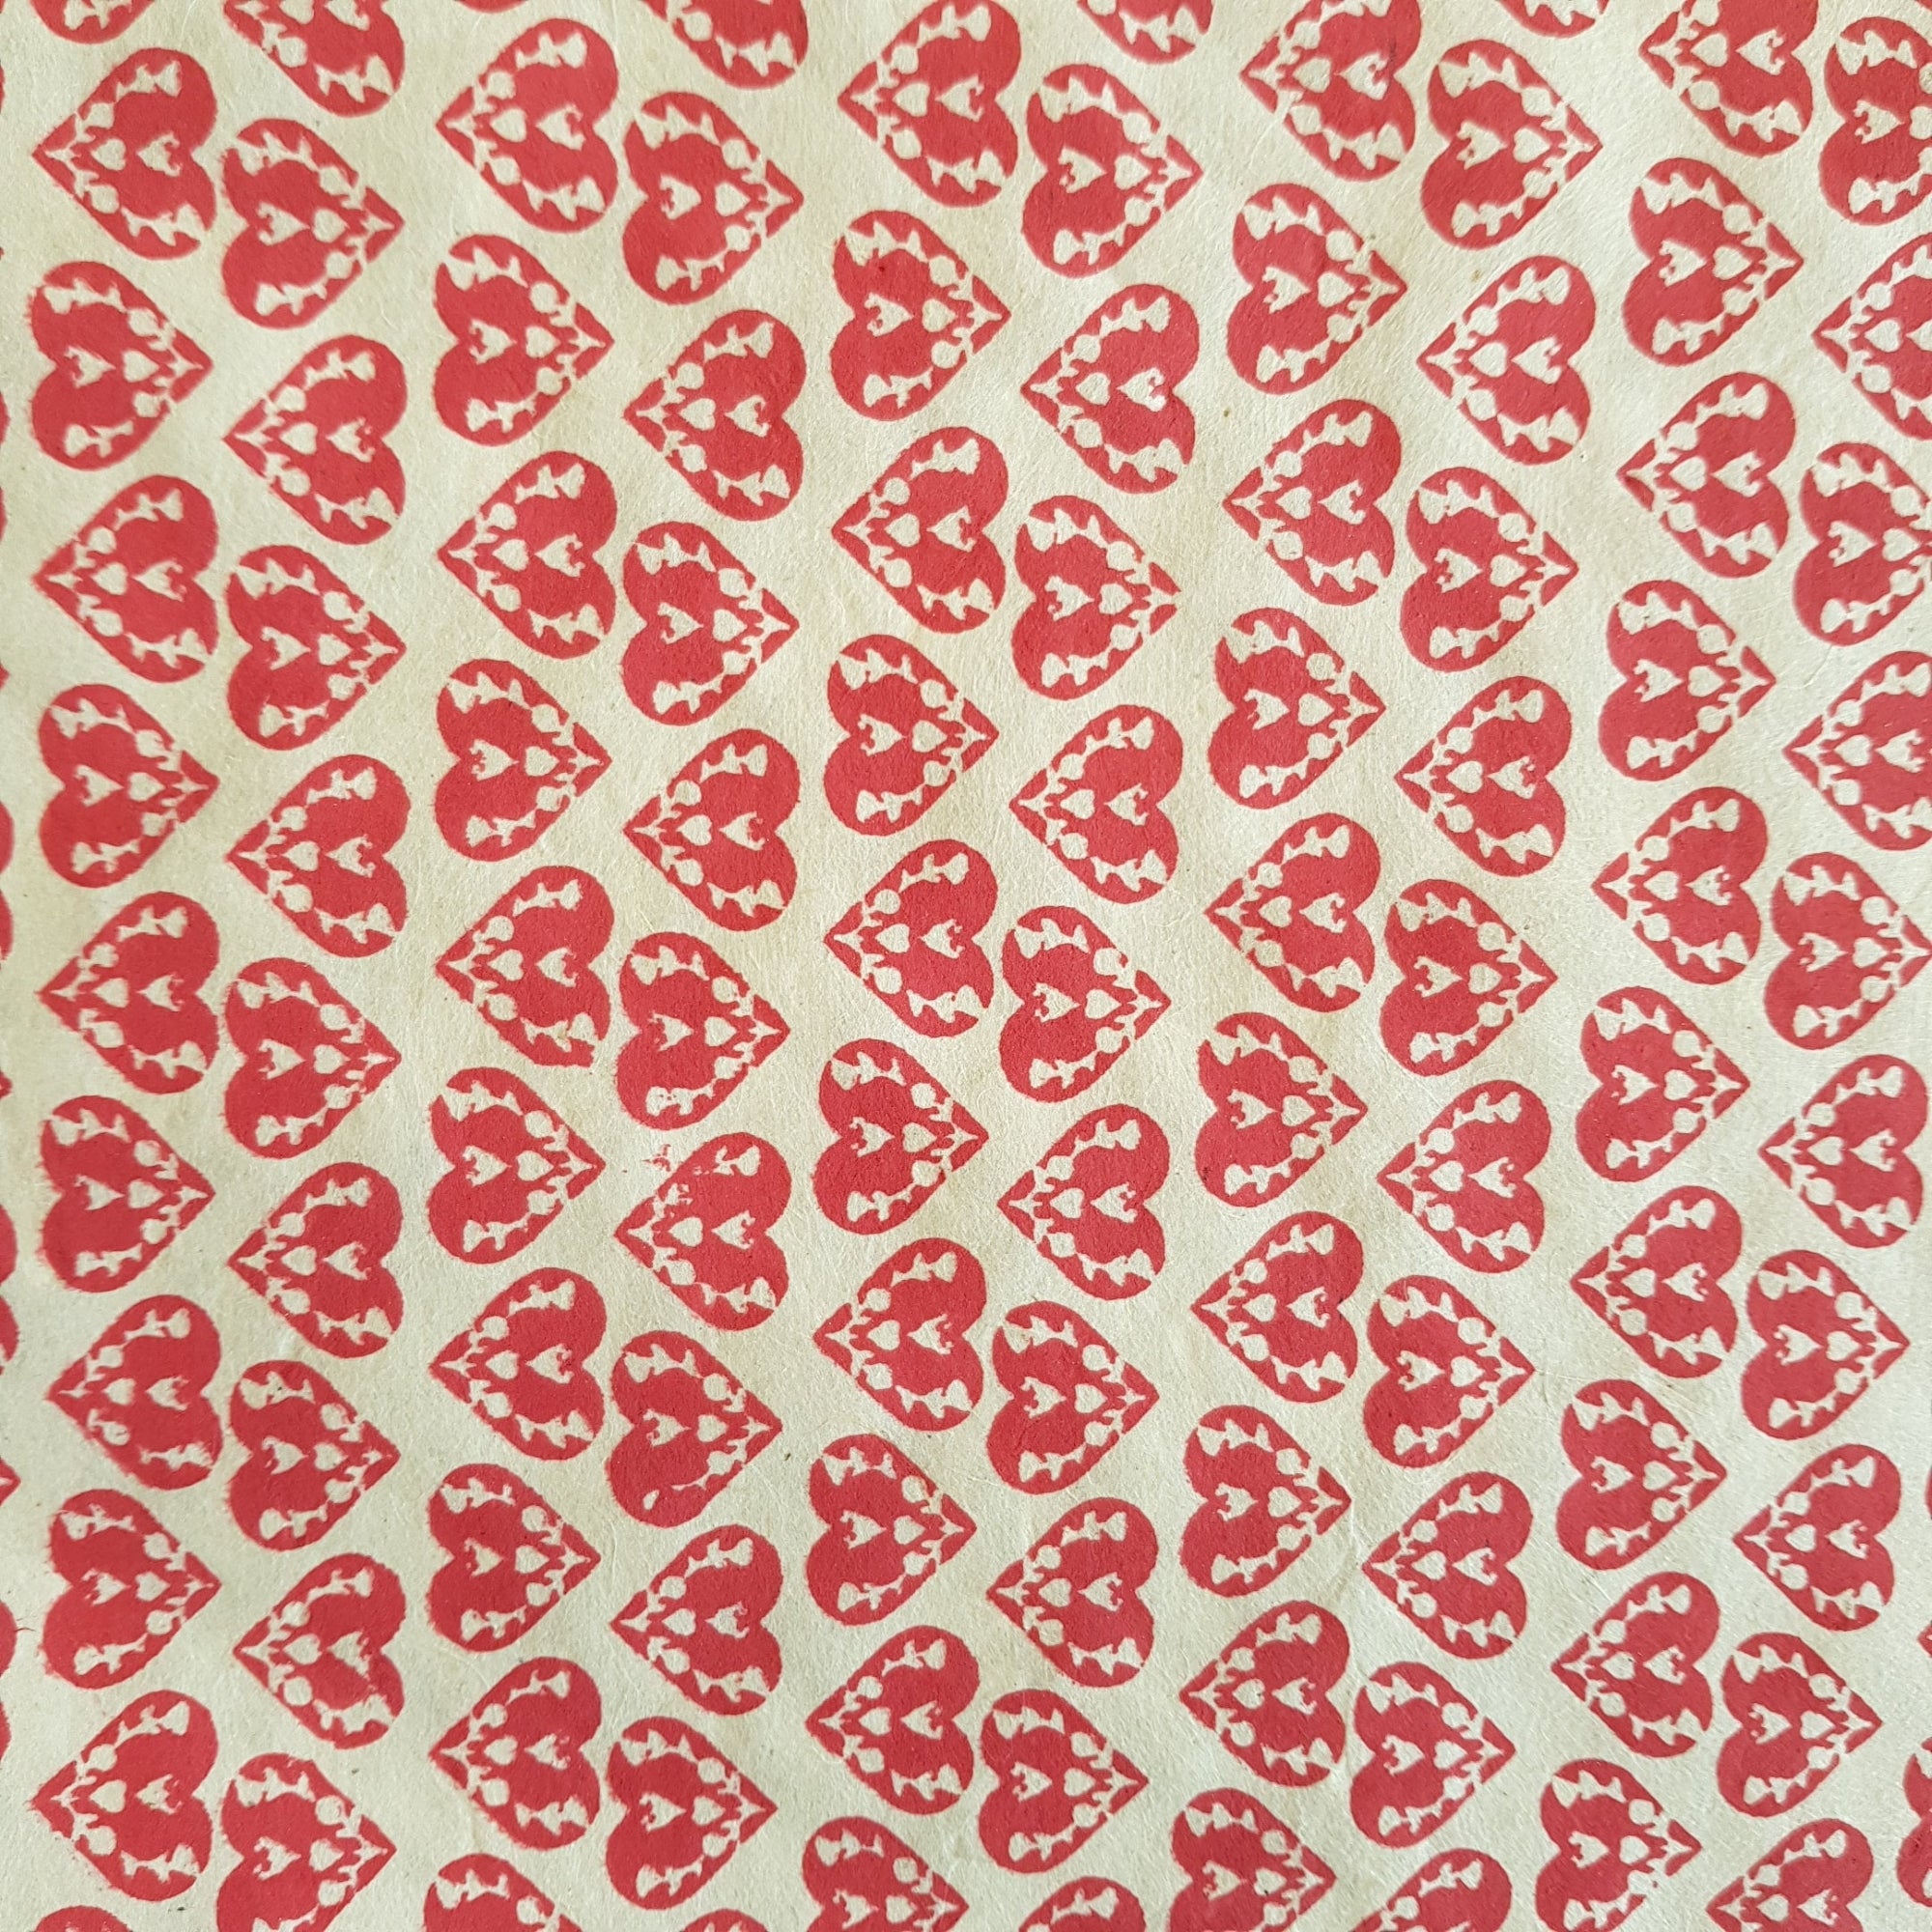 Red Scandi Hearts Print on Lokta Paper, Tree Free & Sustainable